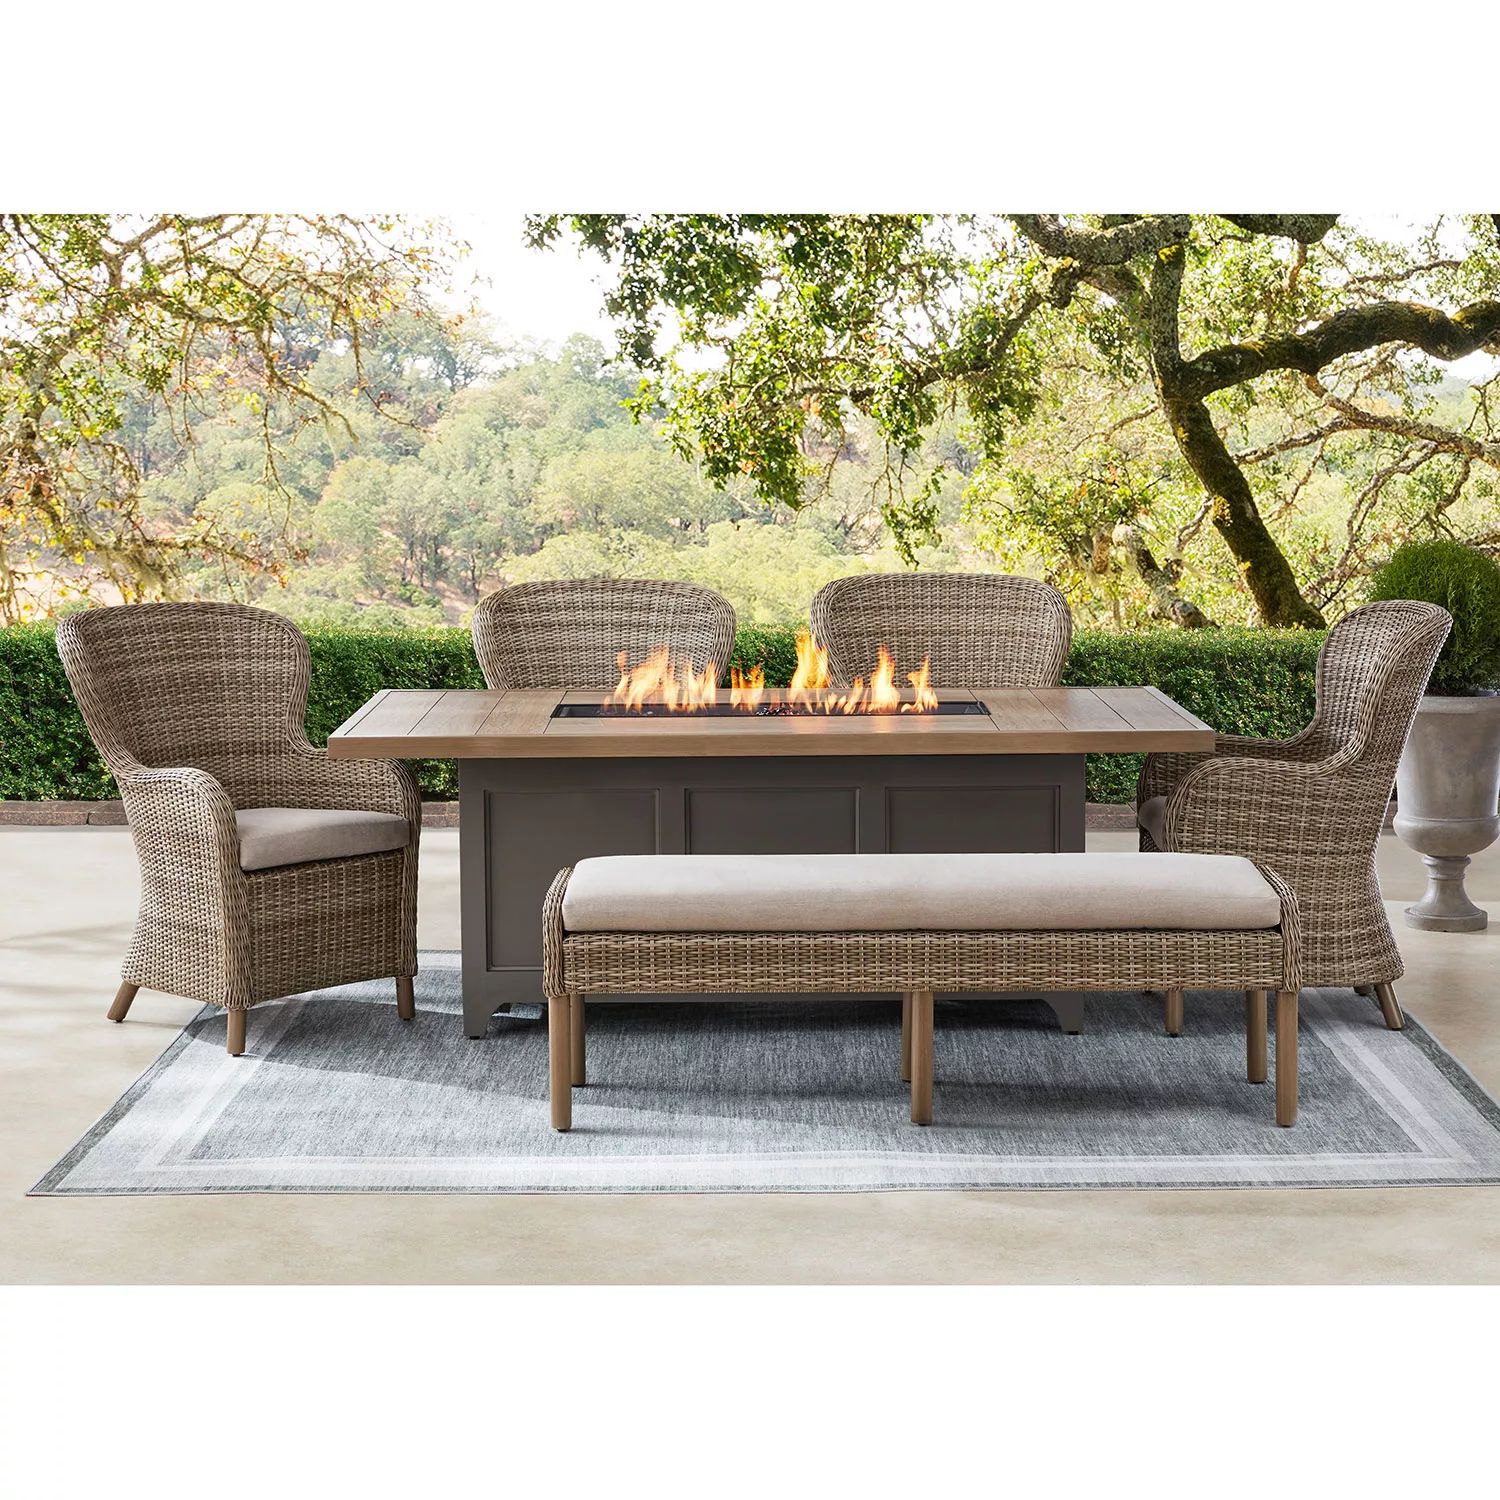 Member's Mark Rosehill 6-Piece Dining Set with Fire | Sam's Club